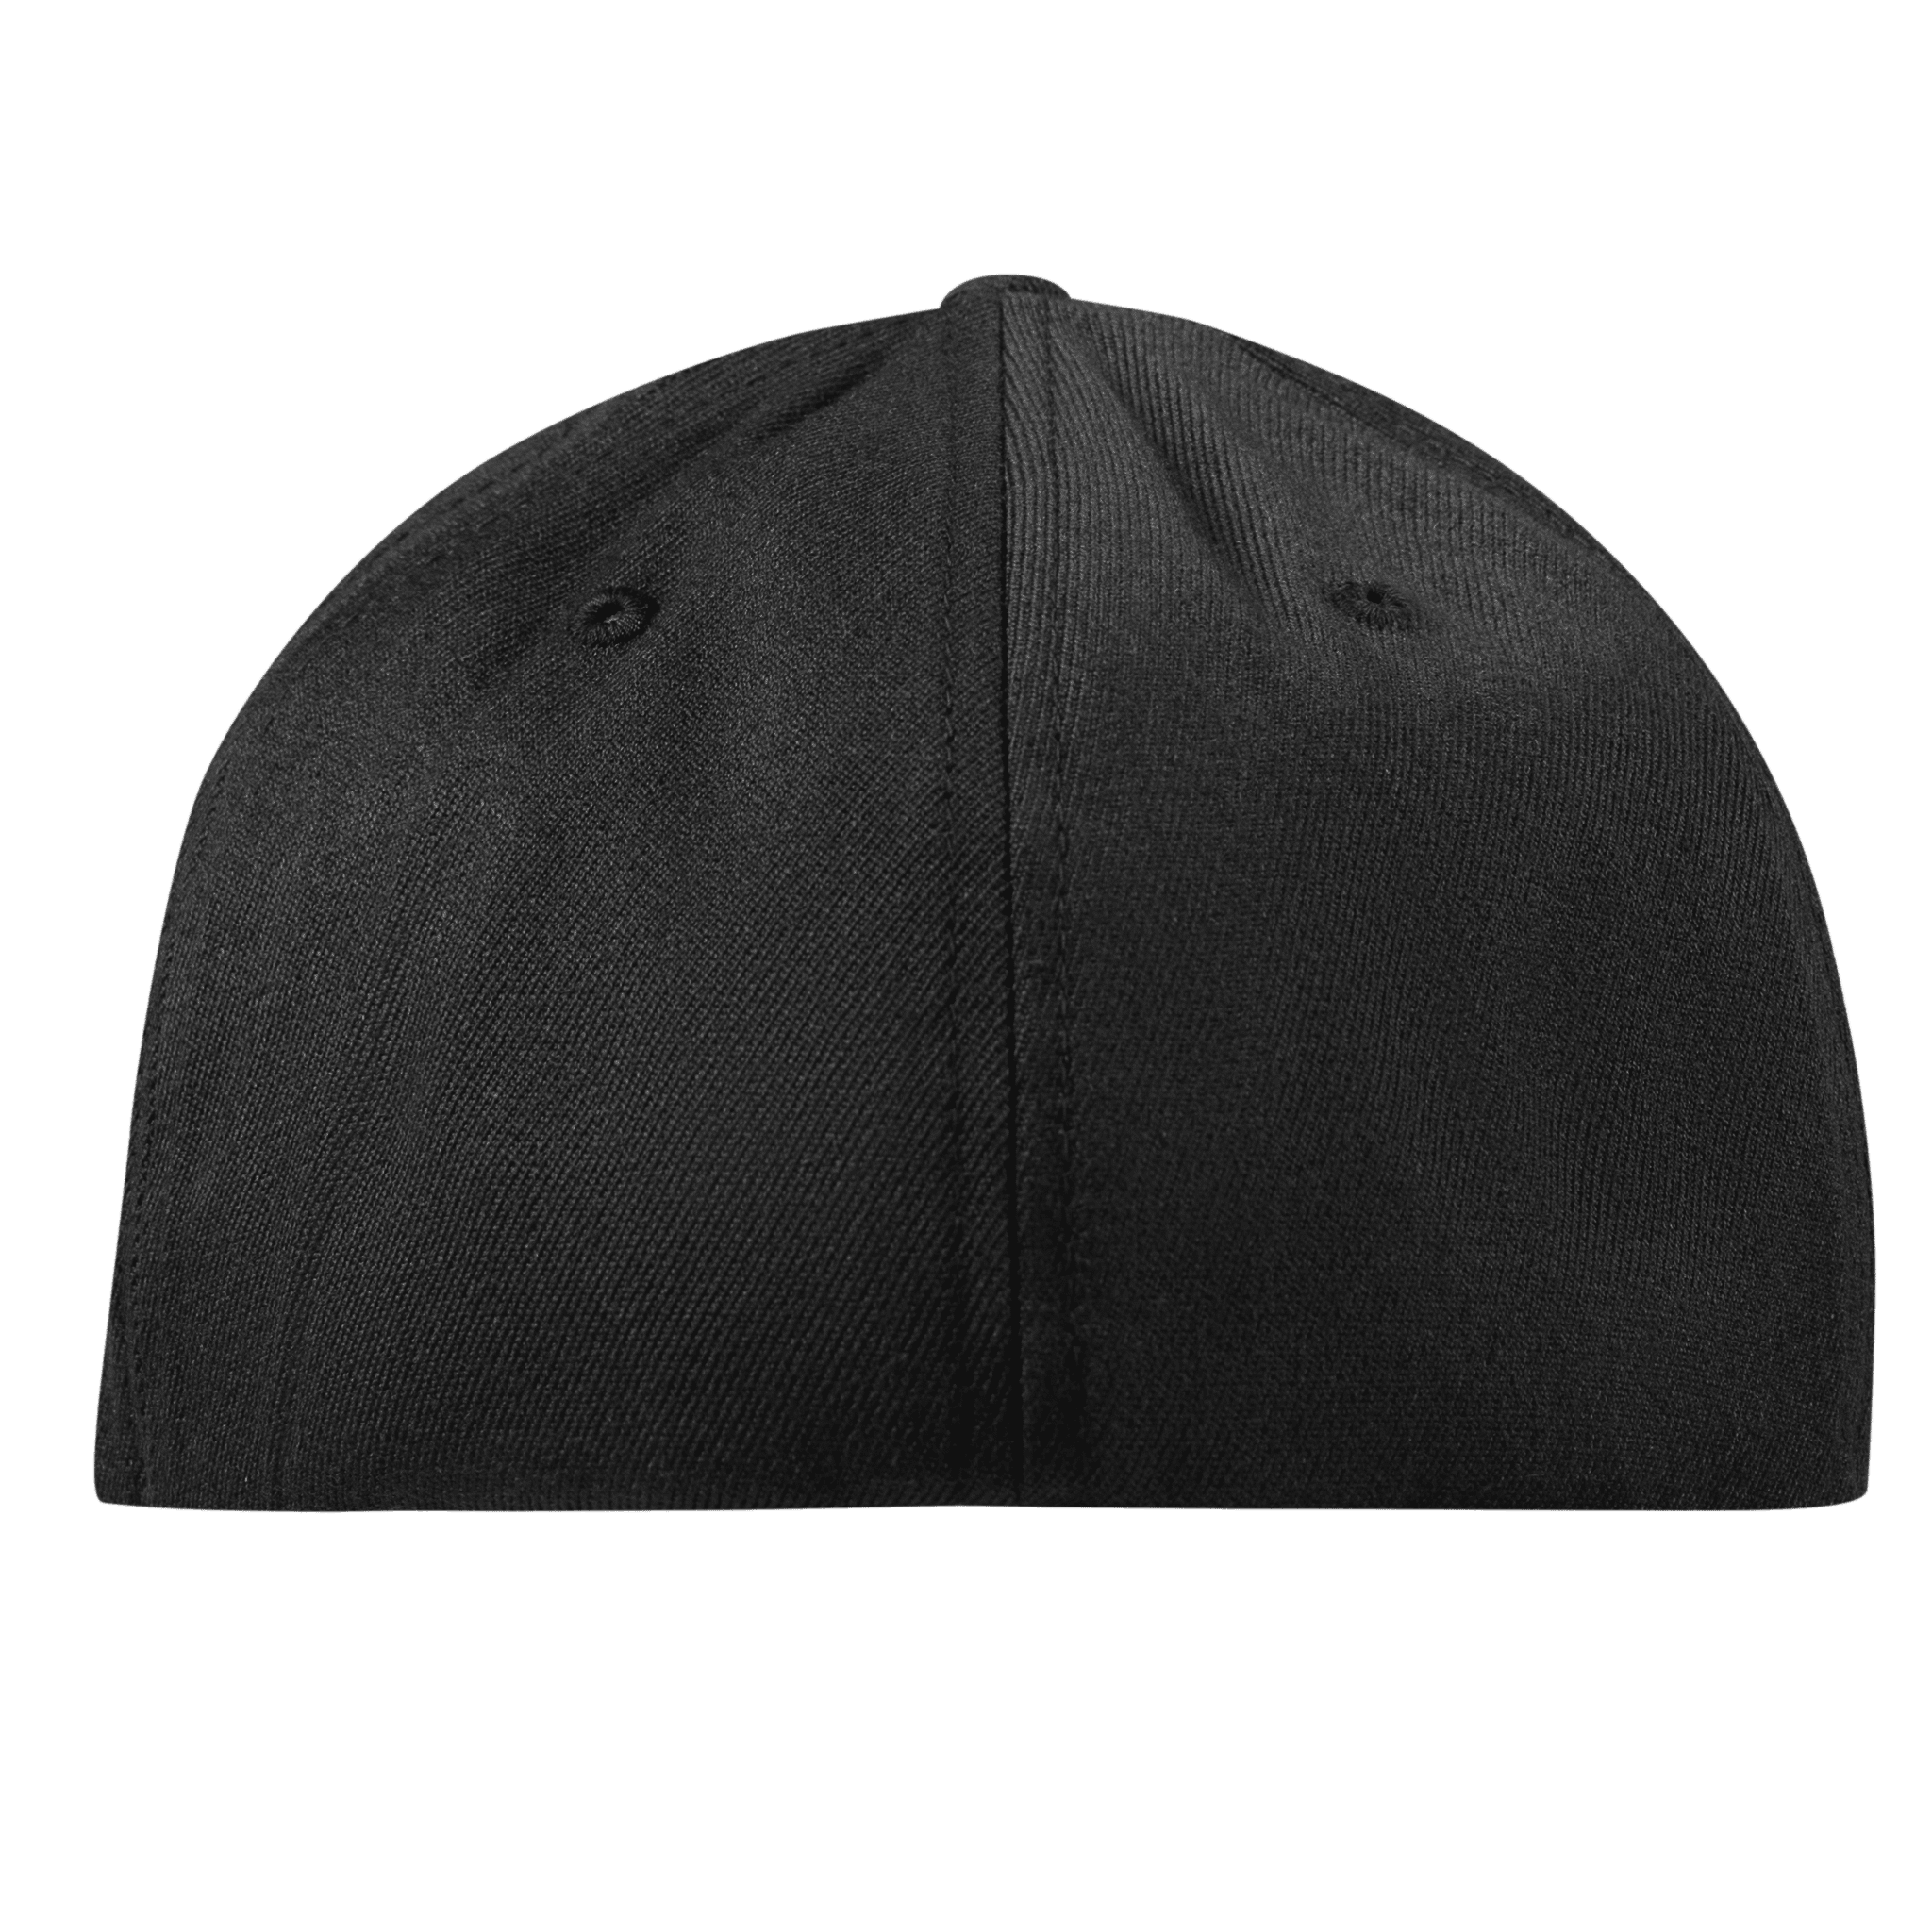 Oklahoma 46 Flexfit Fitted Back Black